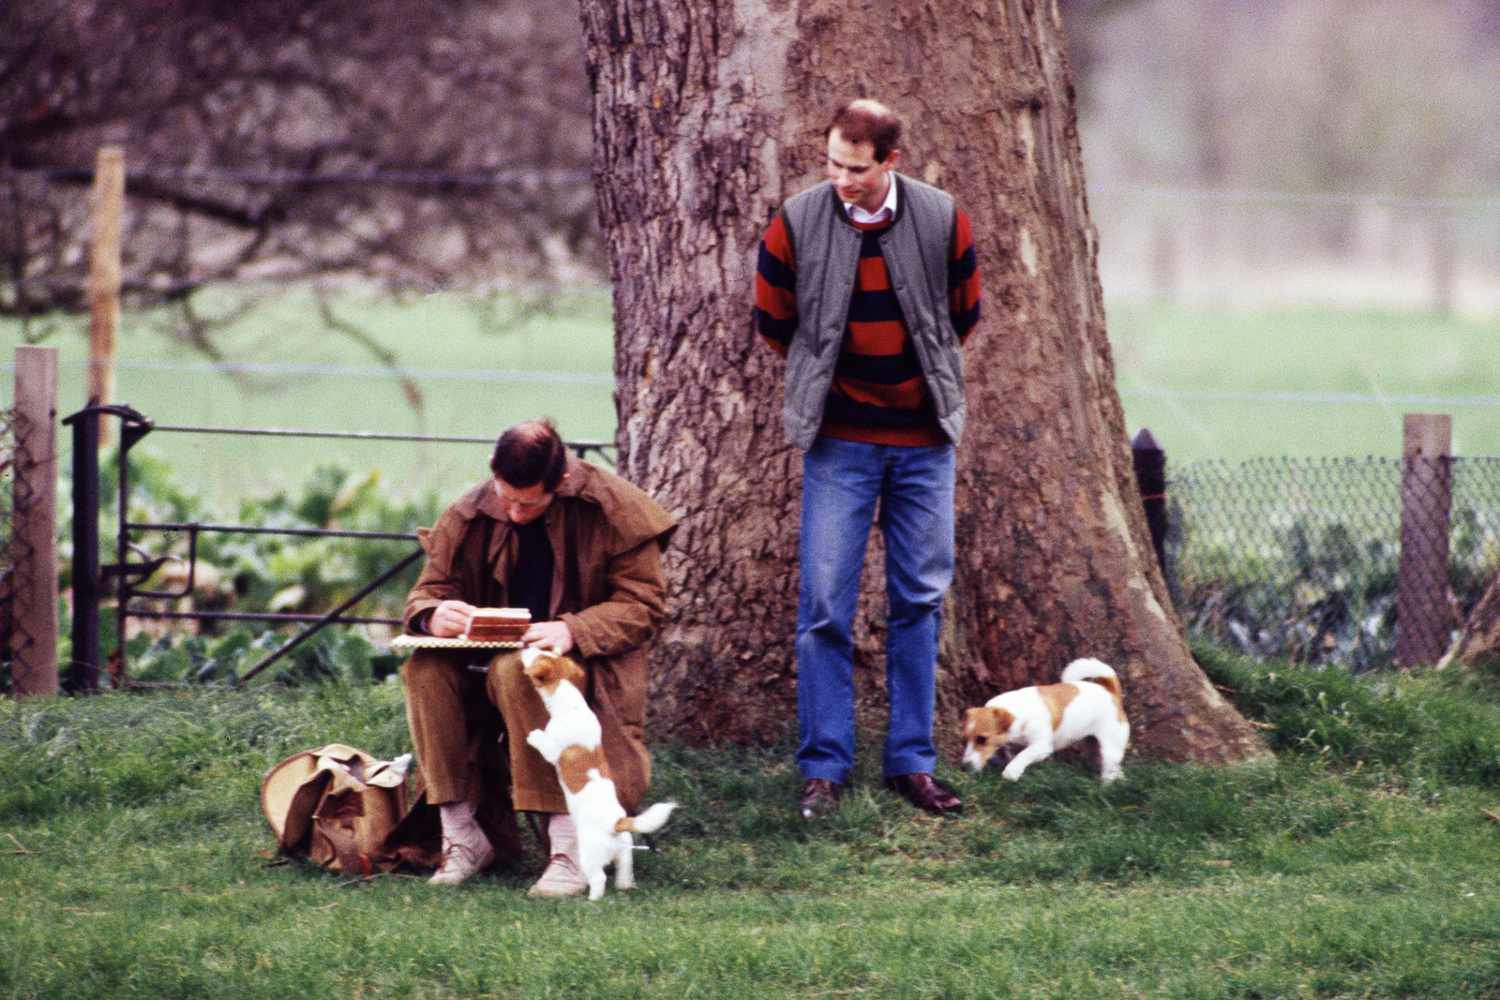 Prince Charles sketching on the bank of the River Thames, at Windsor Castle, with Prince Edward, and accompanied by his dogs in 1989